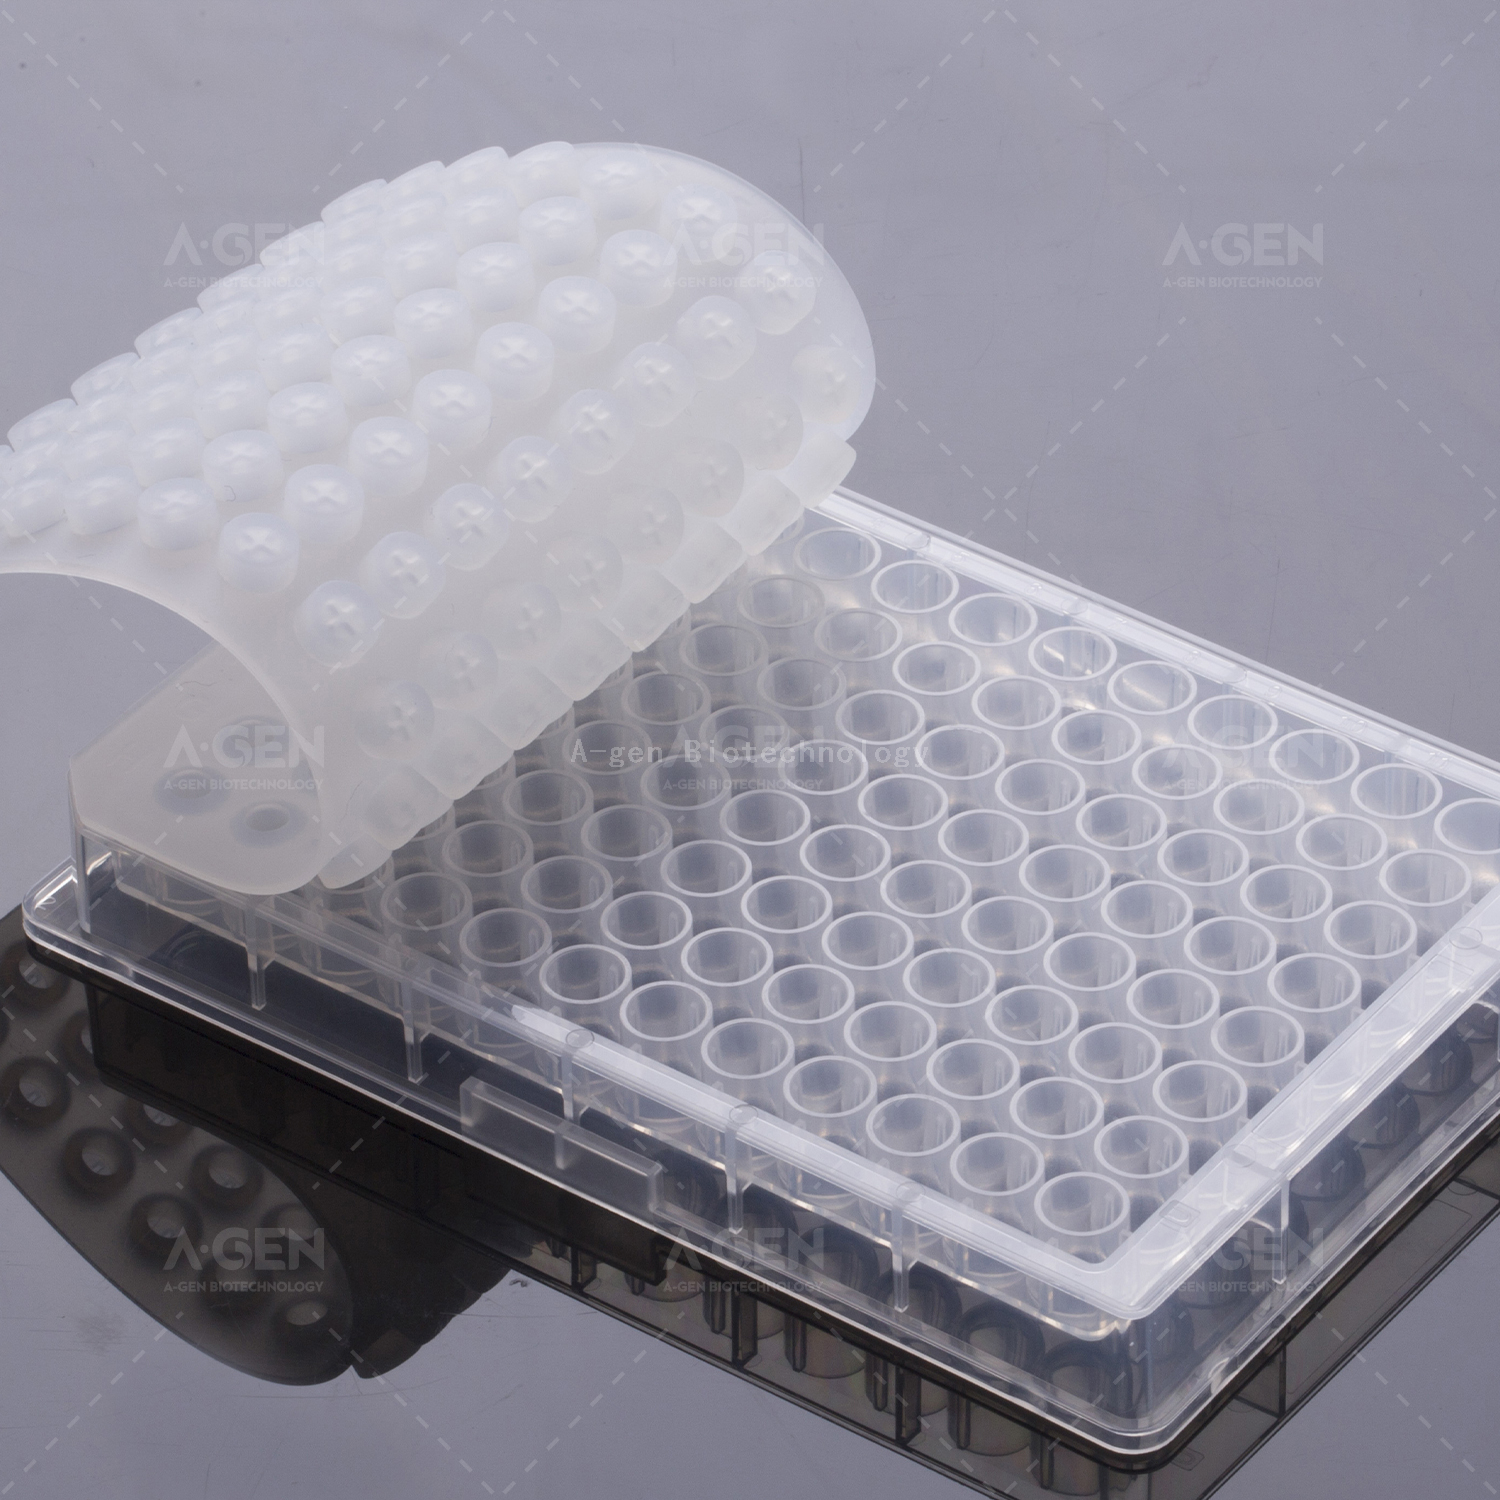 PCR 96 Round-Well Silicone Sealing Mat for 96 Well PCR Plate